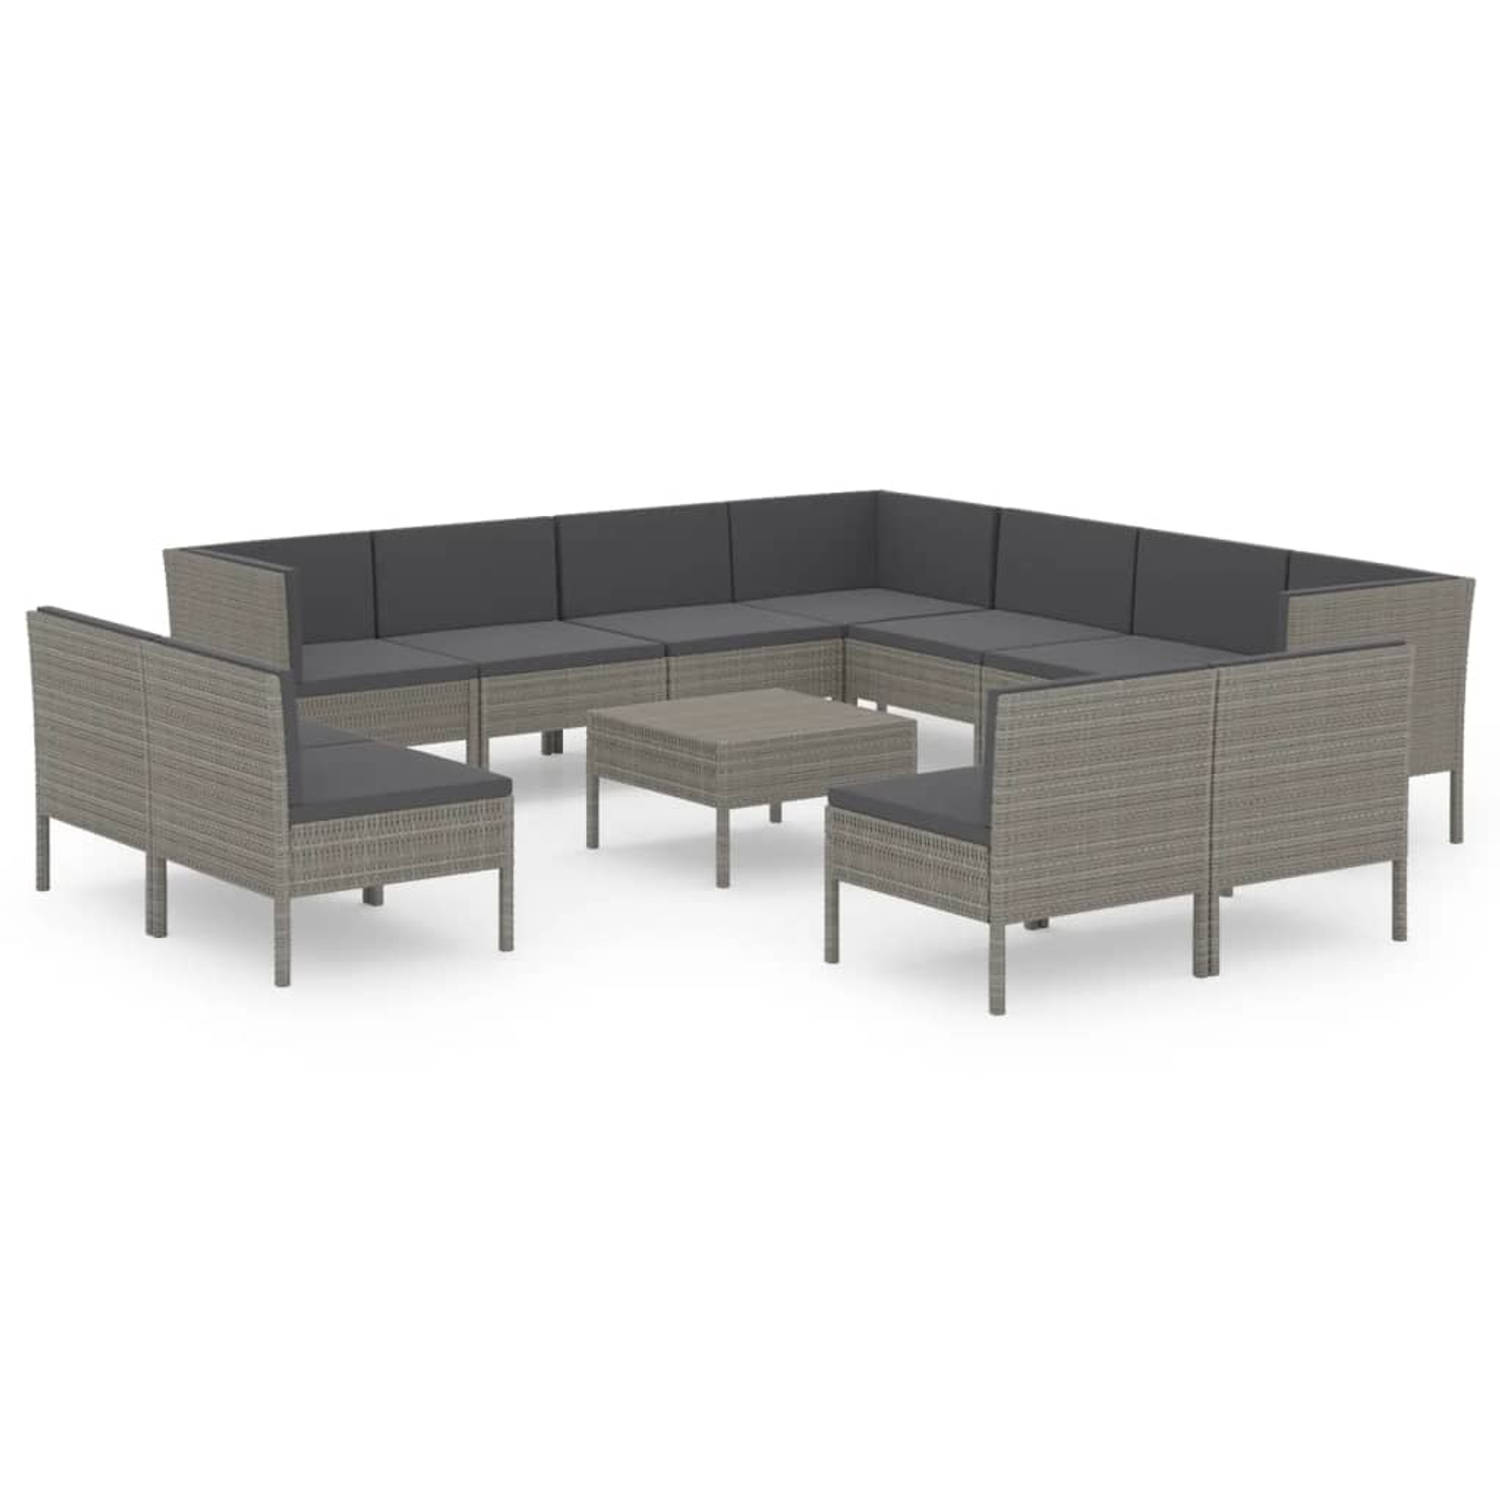 The Living Store Loungeset Modulaire Tuinmeubelset - 60x60x35 cm - Grijs - PE-rattan/staal/polyester - Montage vereist